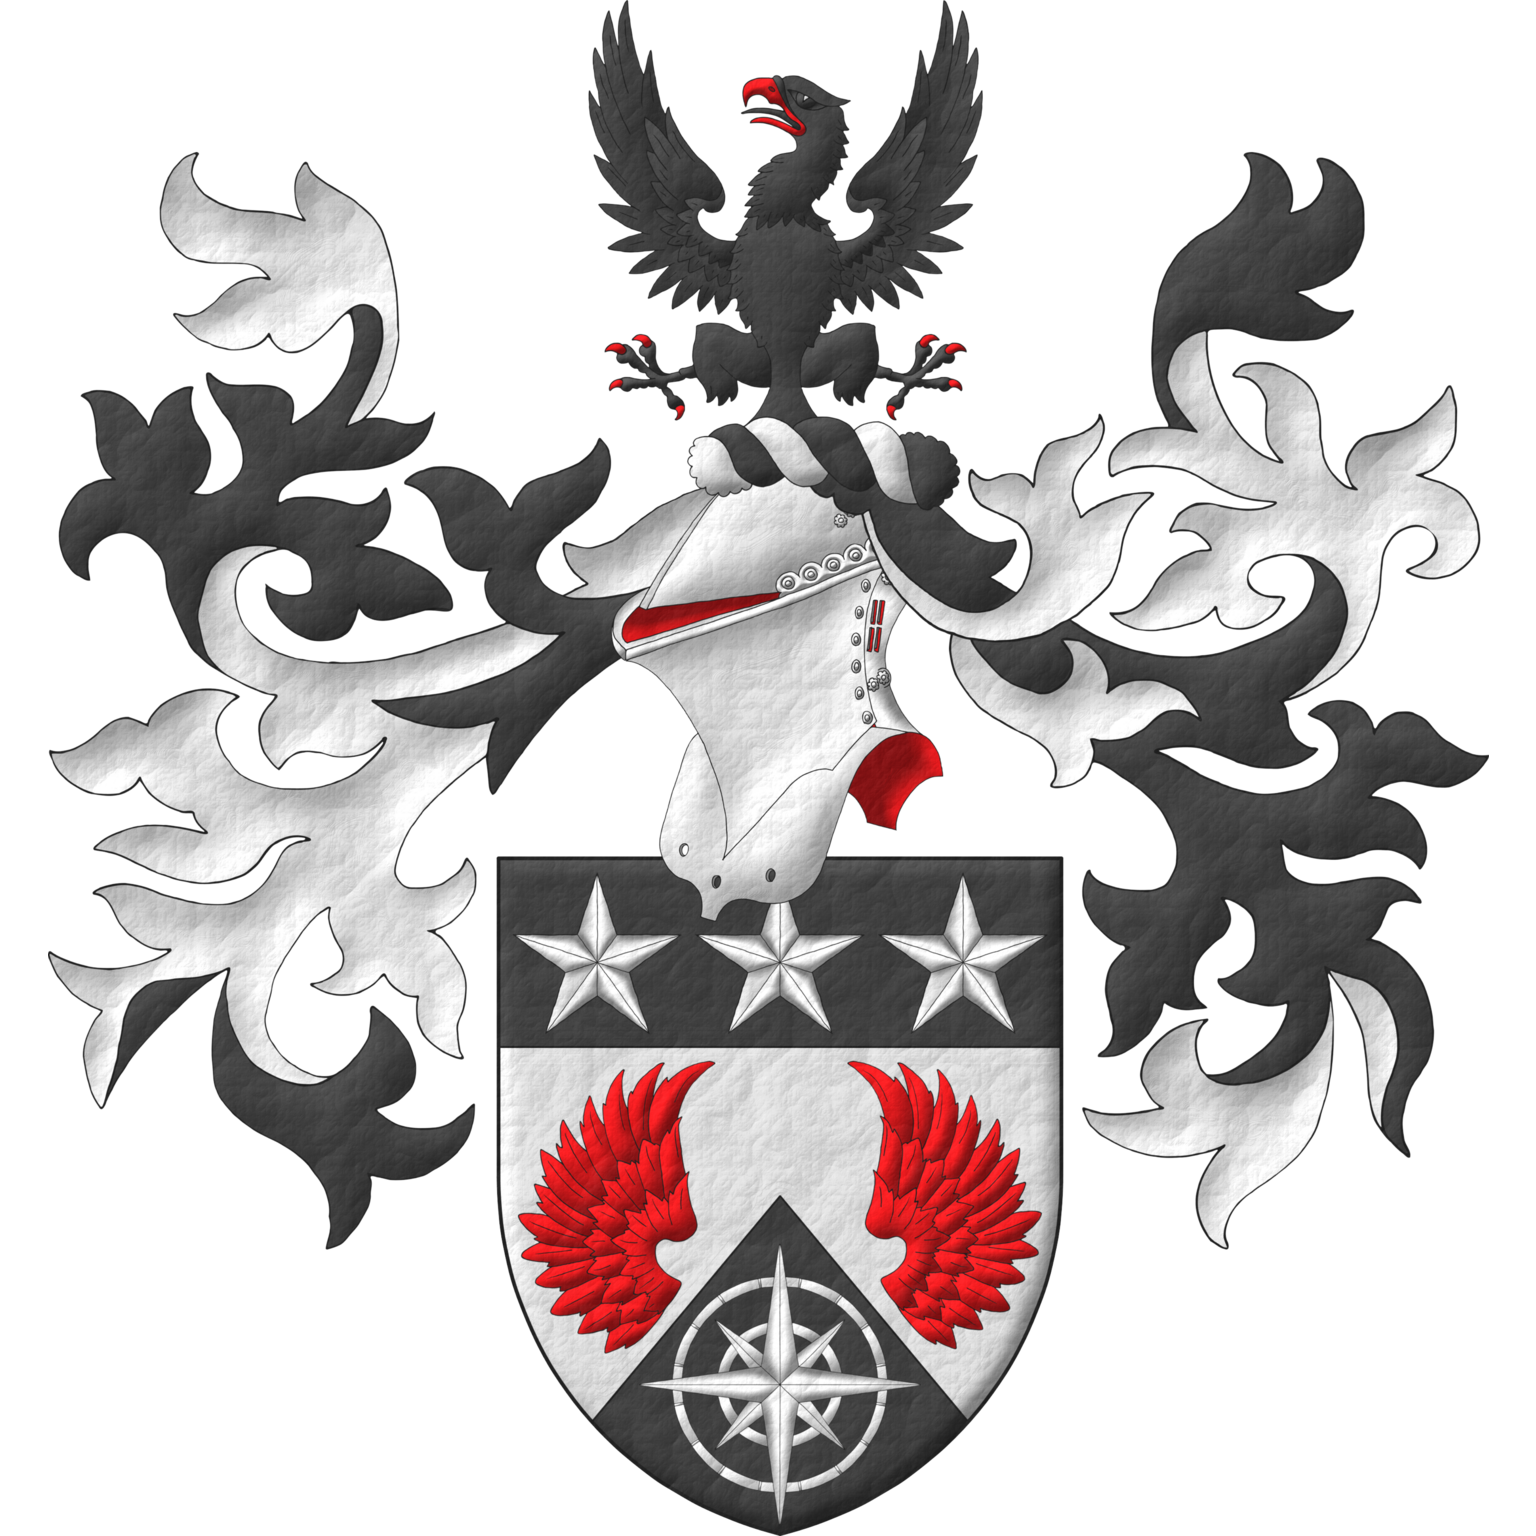 Party per chevron Argent and Sable, two wings Gules, in base a compass rose Argent; on a chief Sable, three mullets Argent. Crest: Upon a helm with a wreath Argent and Sable, an eagle displayed Sable, armed and beaked Gules. Mantling: Sable doubled Argent.